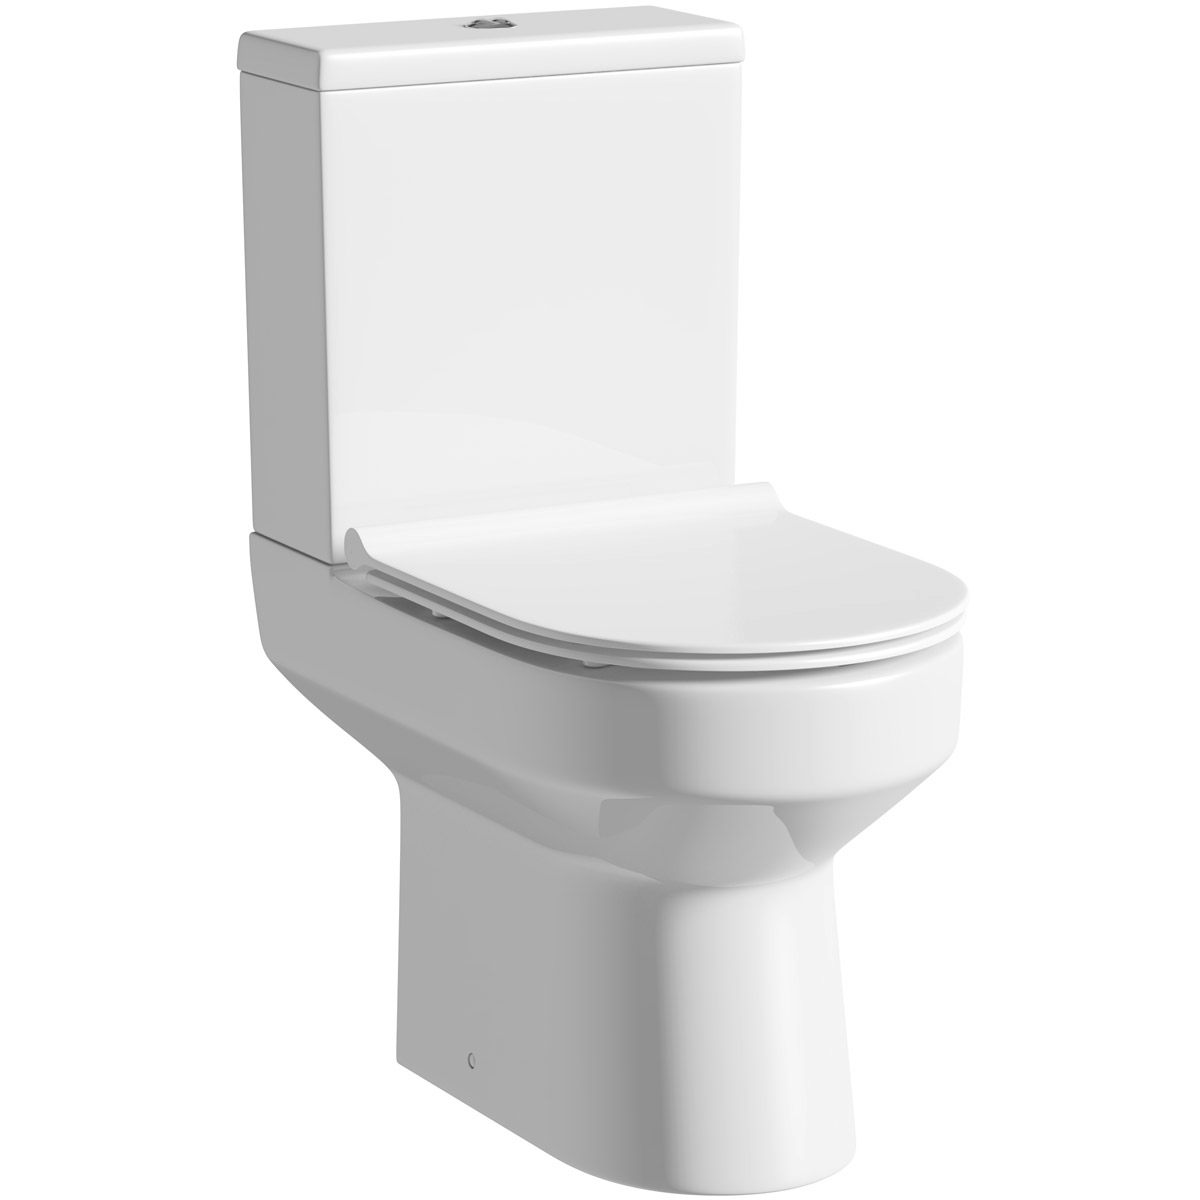 Orchard Dee Close coupled Toilet with Rectangular Push Button and Soft Close Toilet seat